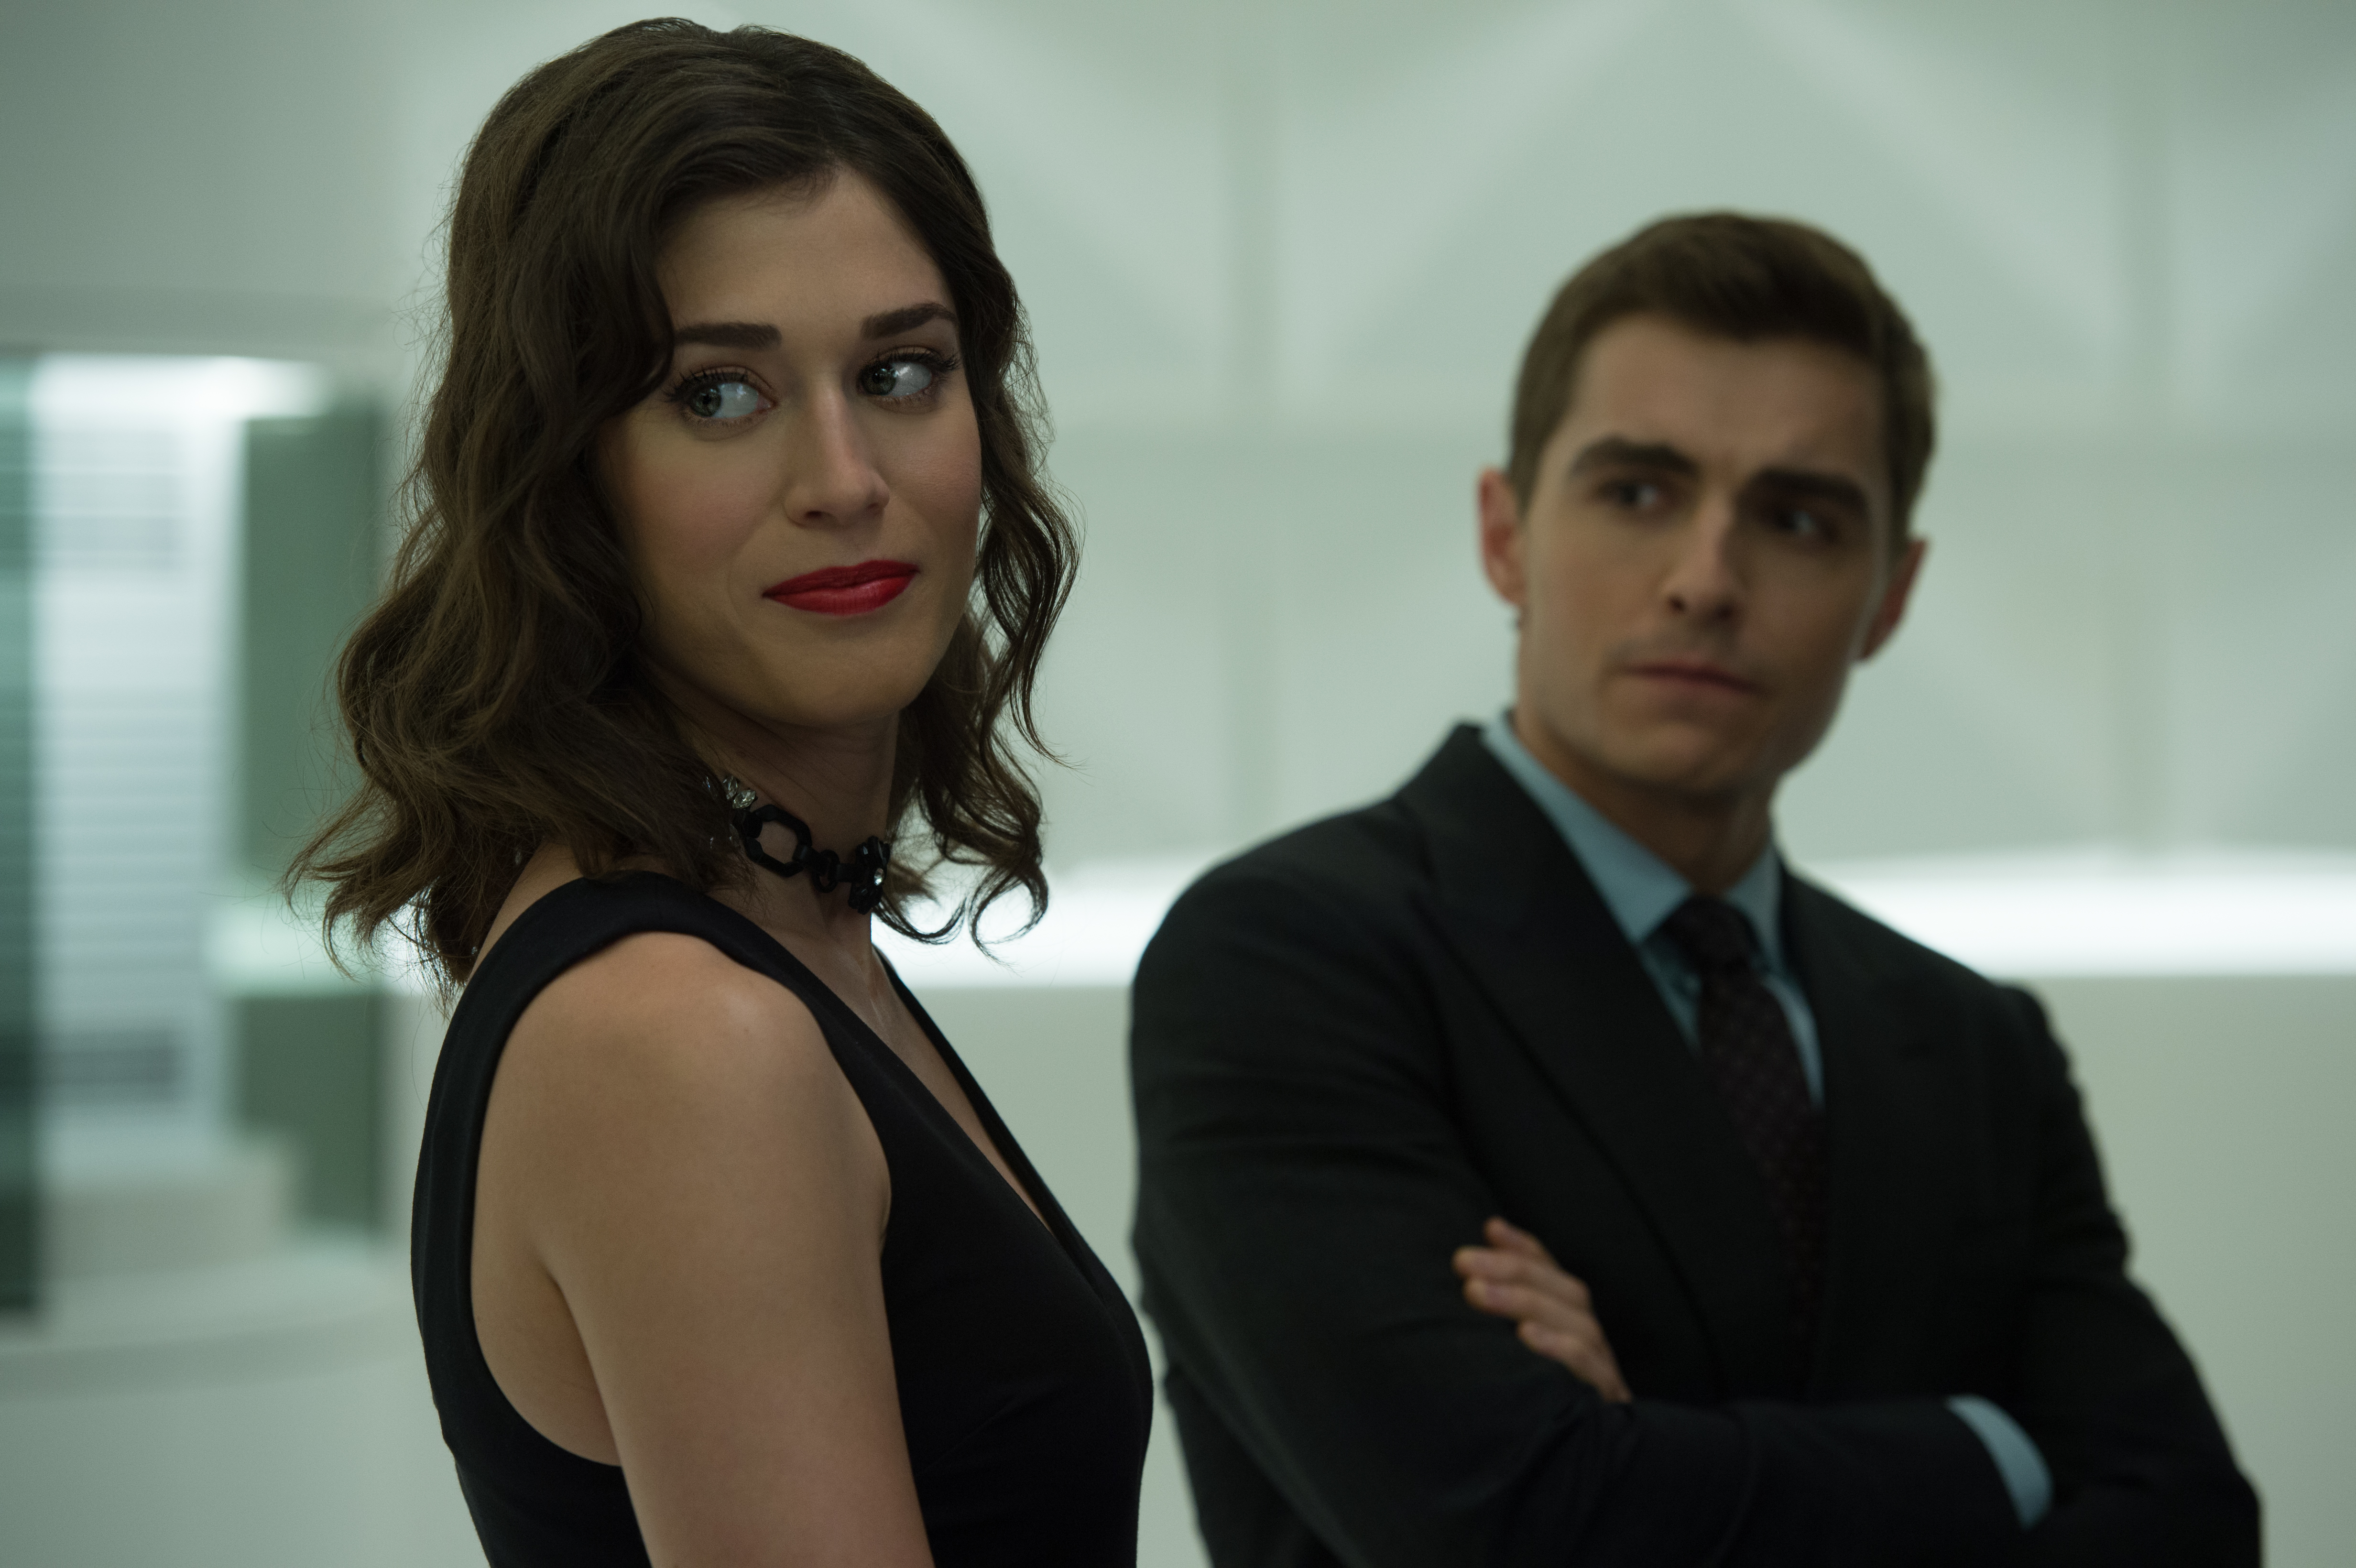 Dave Franco Jack Wilder Now You See Me 2 Lizzy Caplan Lula Now You See Me 4928x3280